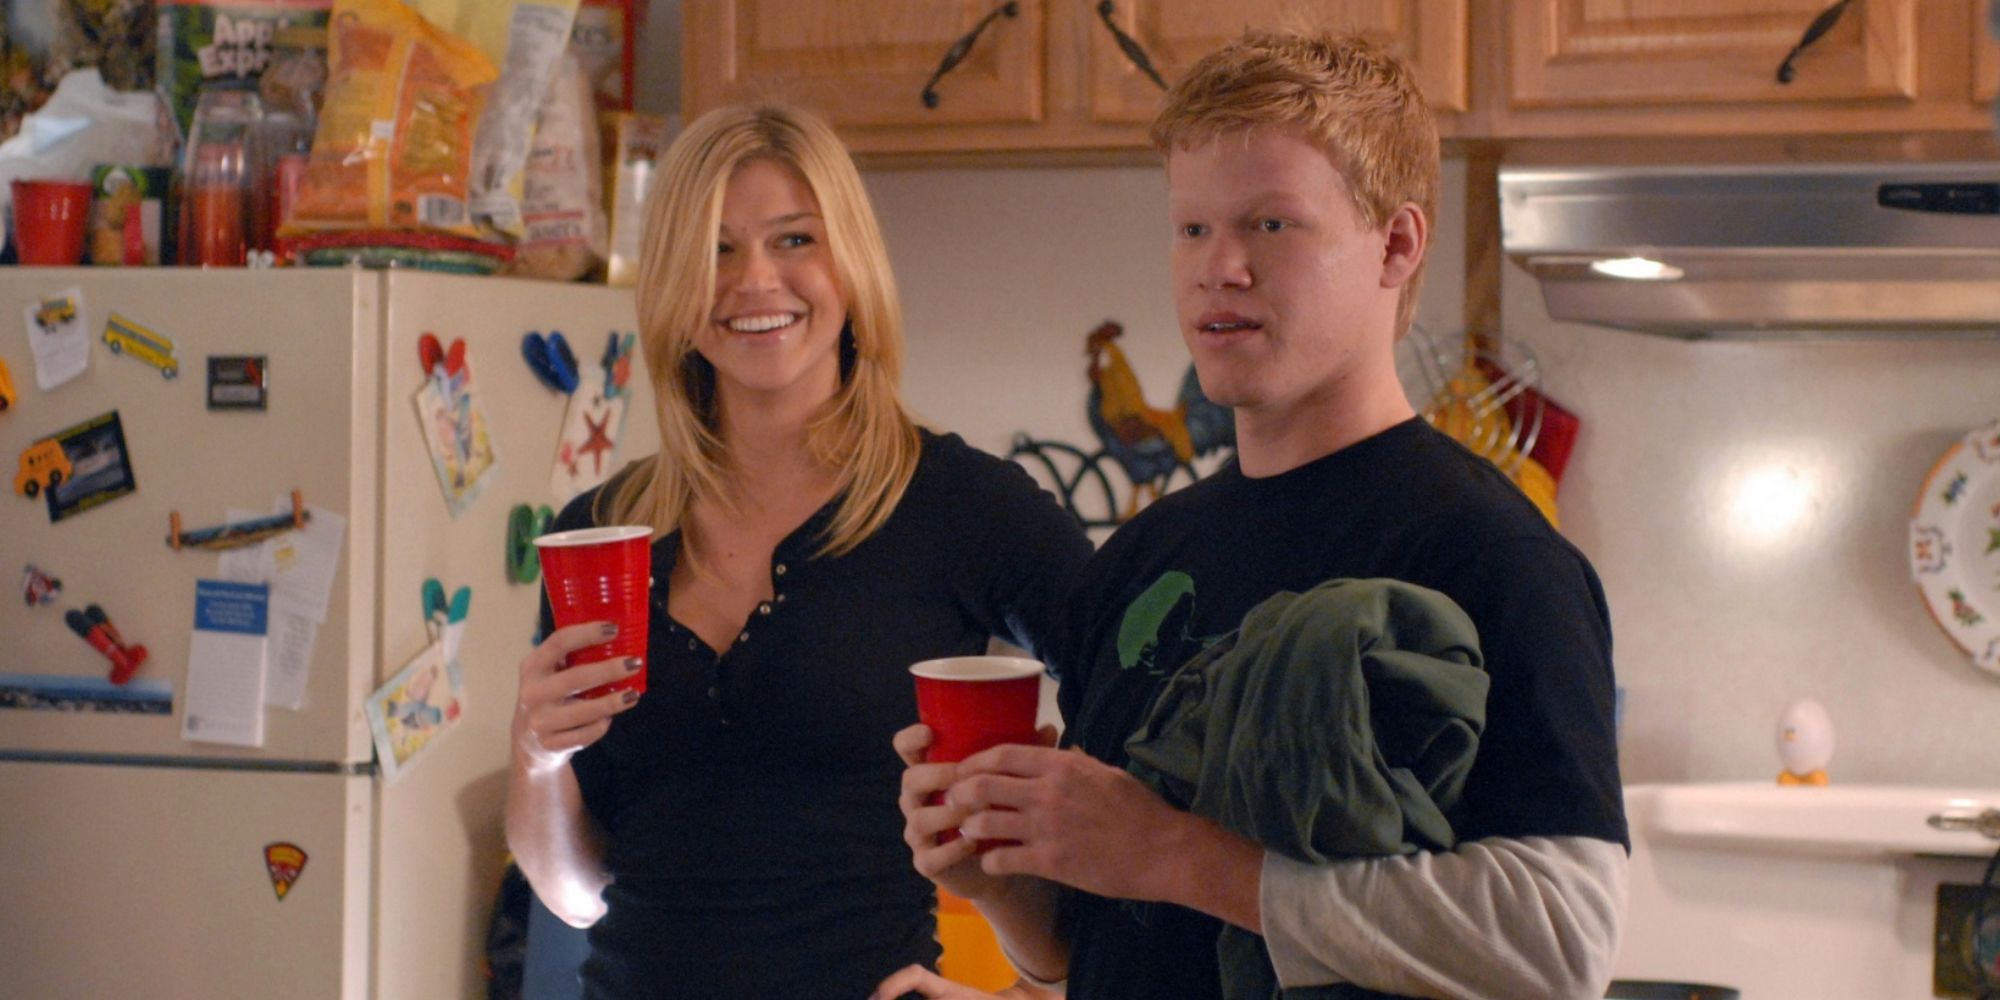 Tyra and Landry stand together in a kitchen at a party in Friday Night Lights